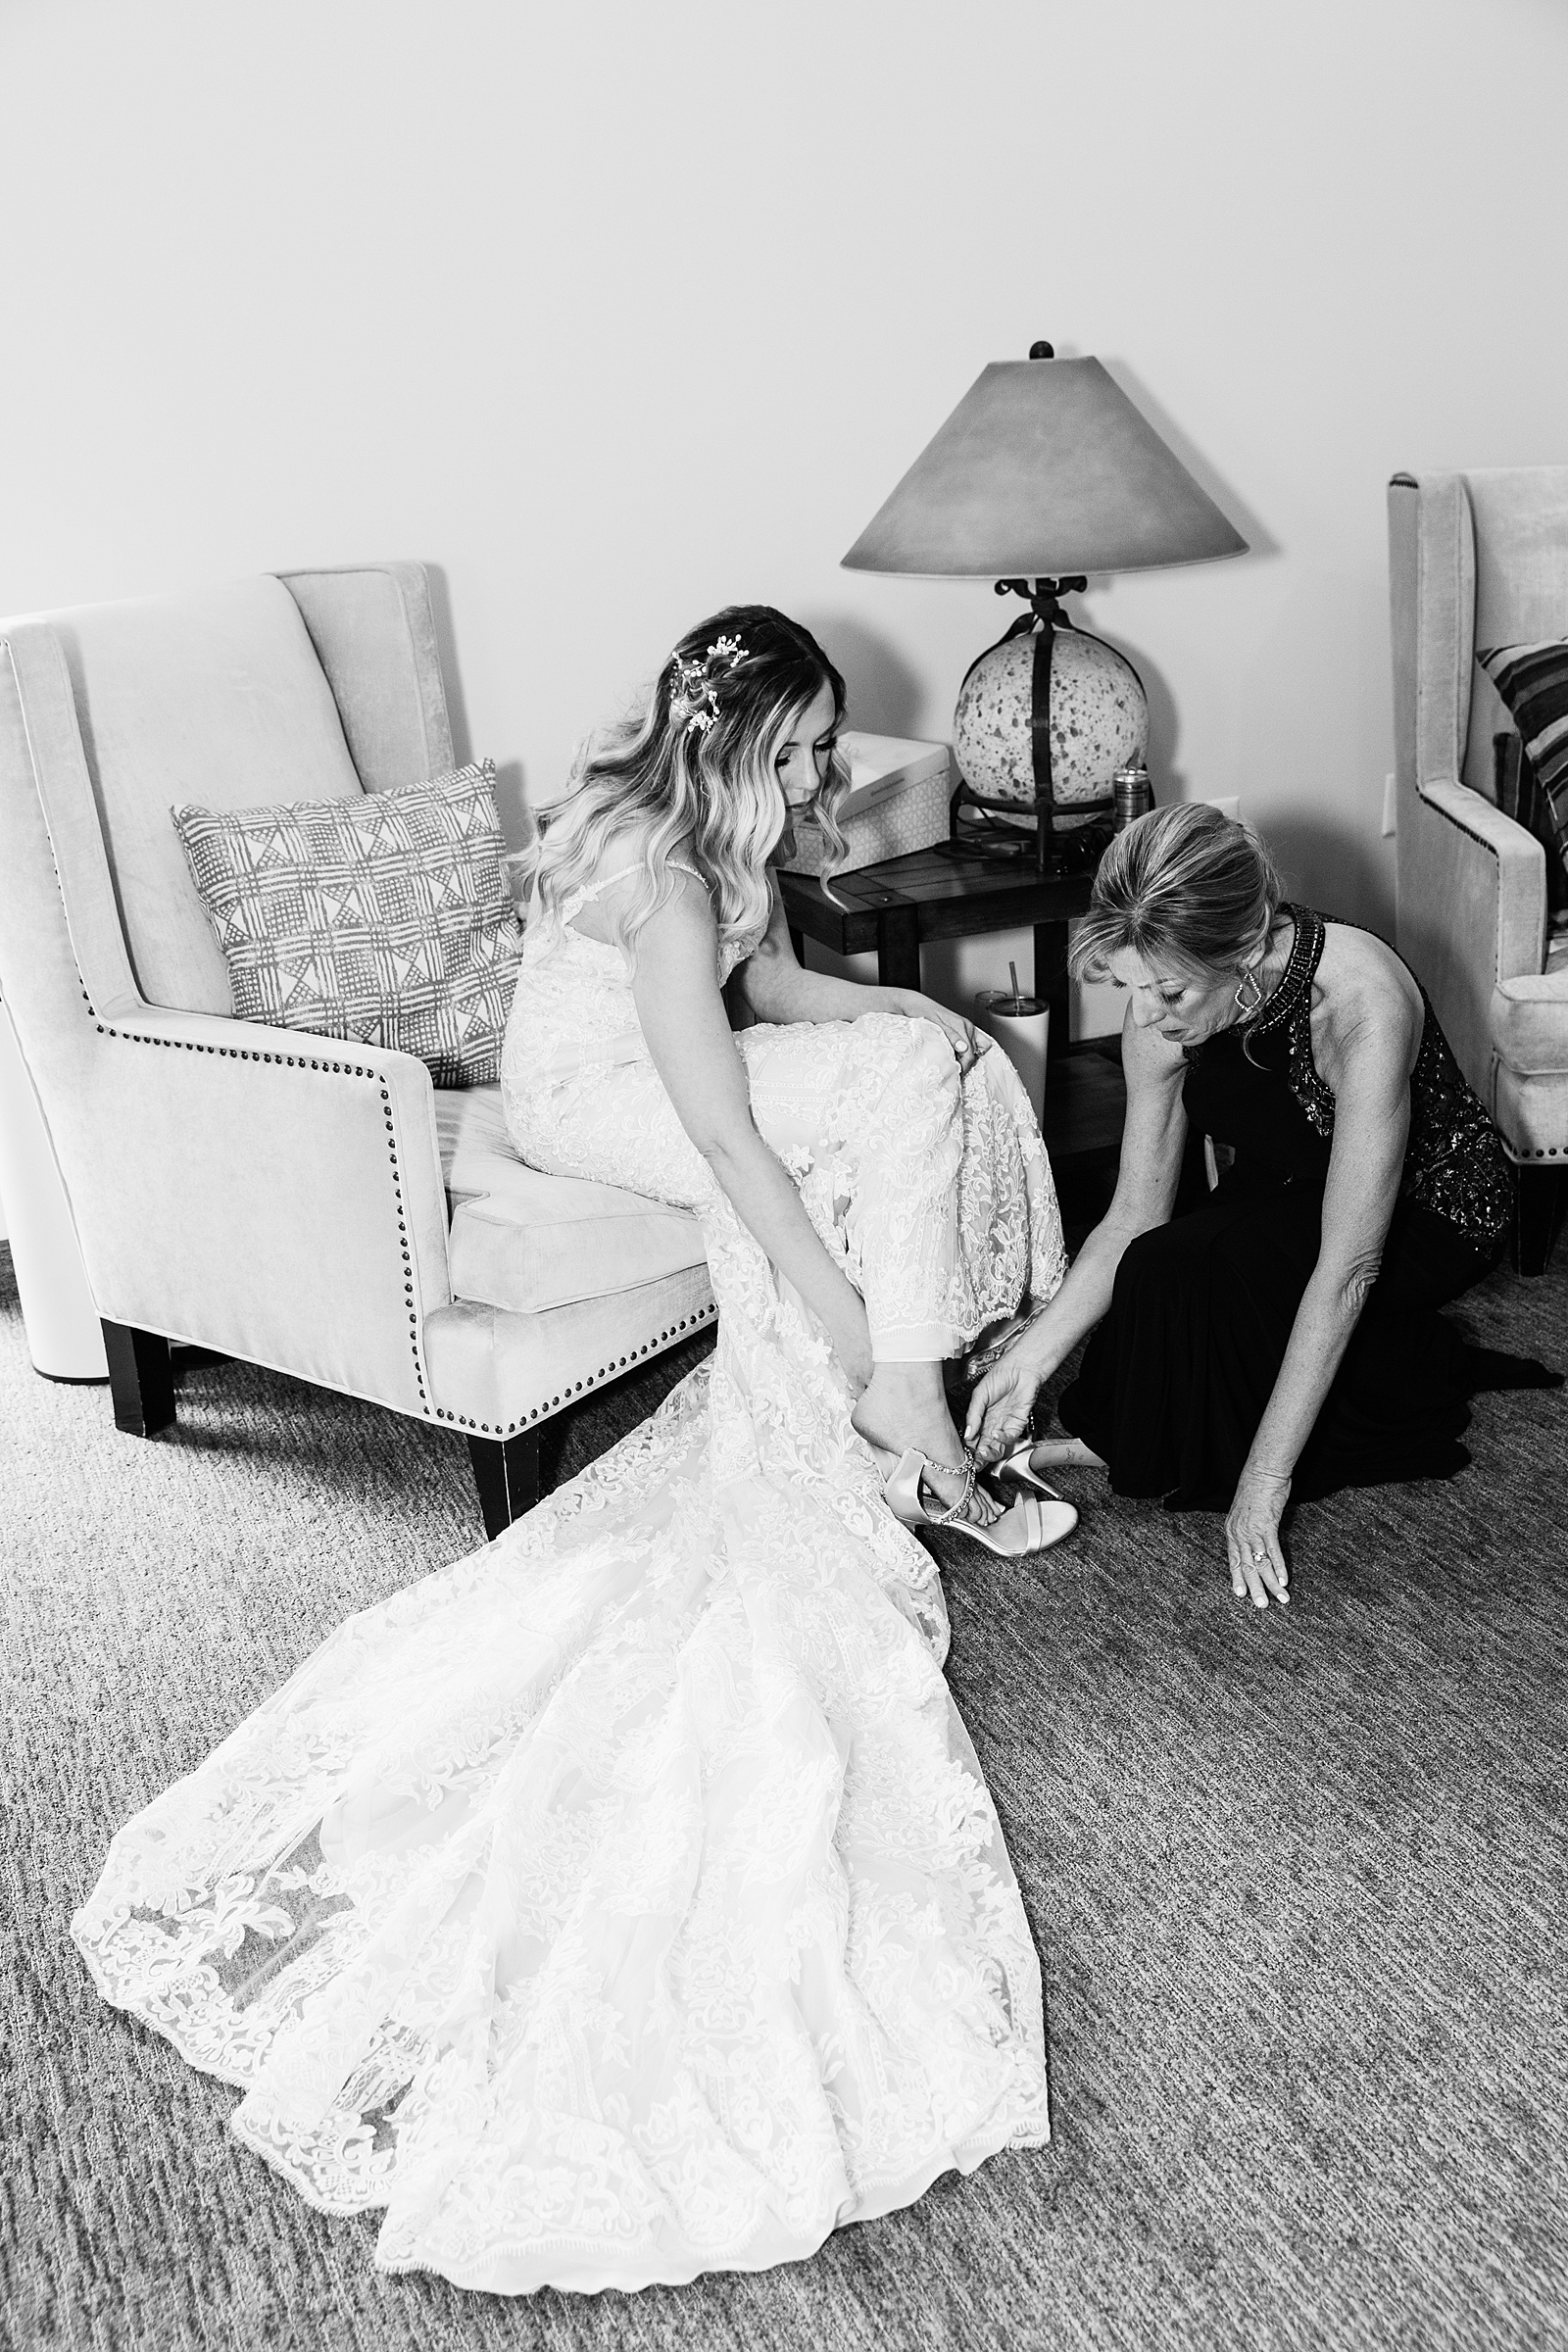 Bride's mother helping her put her shoes on at Brides romantic, lace wedding dress at her desert wedding at Troon North by Scottsdale wedding photographer PMA Photography.